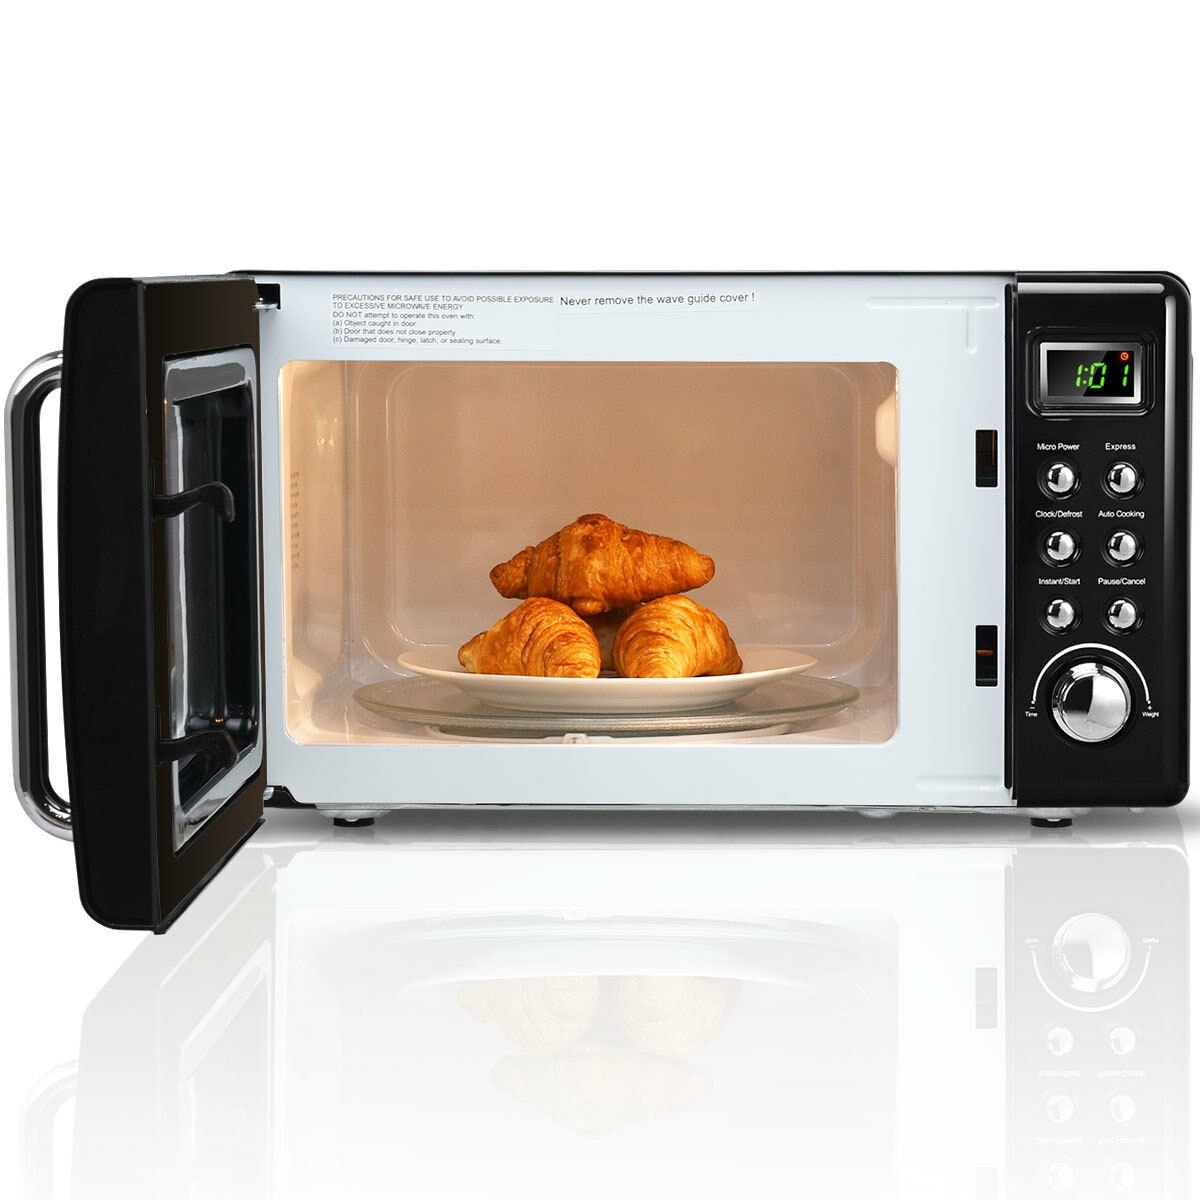  COSTWAY Retro Countertop Microwave Oven, 0.7Cu.ft, 700-Watt,  High Energy Efficiency, 5 Micro Power, Delayed Start Function, with Glass  Turntable & Viewing Window, LED Display, Child Lock (White) : Home & Kitchen